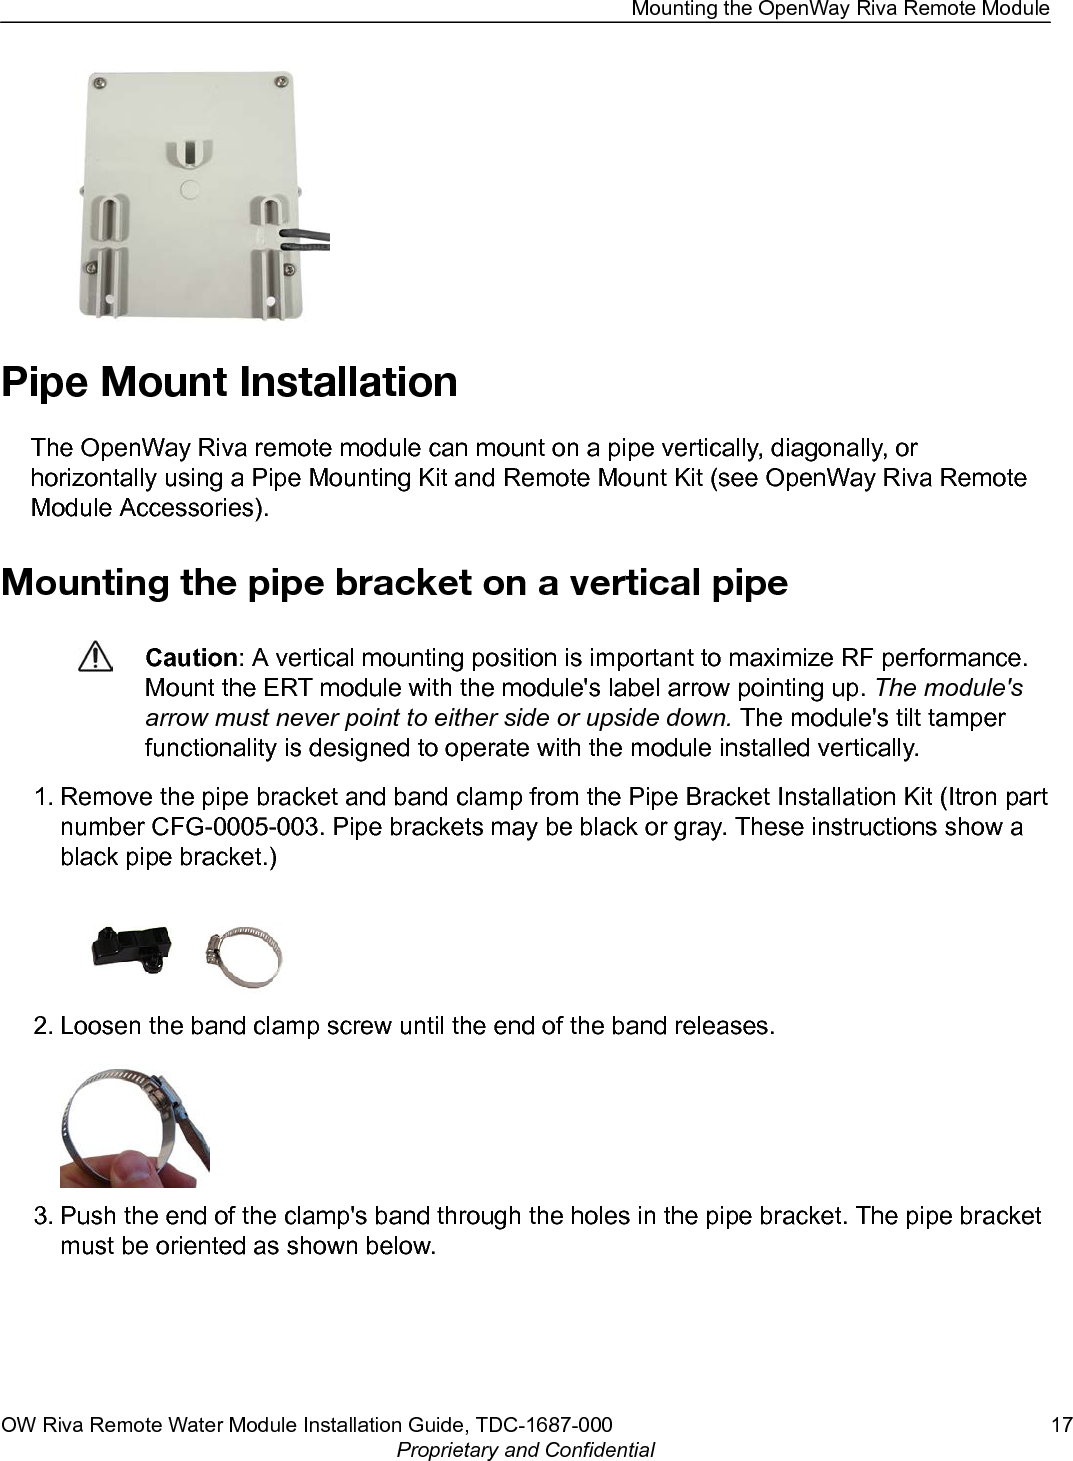 Pipe Mount InstallationThe OpenWay Riva remote module can mount on a pipe vertically, diagonally, orhorizontally using a Pipe Mounting Kit and Remote Mount Kit (see OpenWay Riva RemoteModule Accessories).Mounting the pipe bracket on a vertical pipeCaution: A vertical mounting position is important to maximize RF performance.Mount the ERT module with the module&apos;s label arrow pointing up. The module&apos;sarrow must never point to either side or upside down. The module&apos;s tilt tamperfunctionality is designed to operate with the module installed vertically.1. Remove the pipe bracket and band clamp from the Pipe Bracket Installation Kit (Itron partnumber CFG-0005-003. Pipe brackets may be black or gray. These instructions show ablack pipe bracket.)2. Loosen the band clamp screw until the end of the band releases.3. Push the end of the clamp&apos;s band through the holes in the pipe bracket. The pipe bracketmust be oriented as shown below.Mounting the OpenWay Riva Remote ModuleOW Riva Remote Water Module Installation Guide, TDC-1687-000 17Proprietary and Confidential